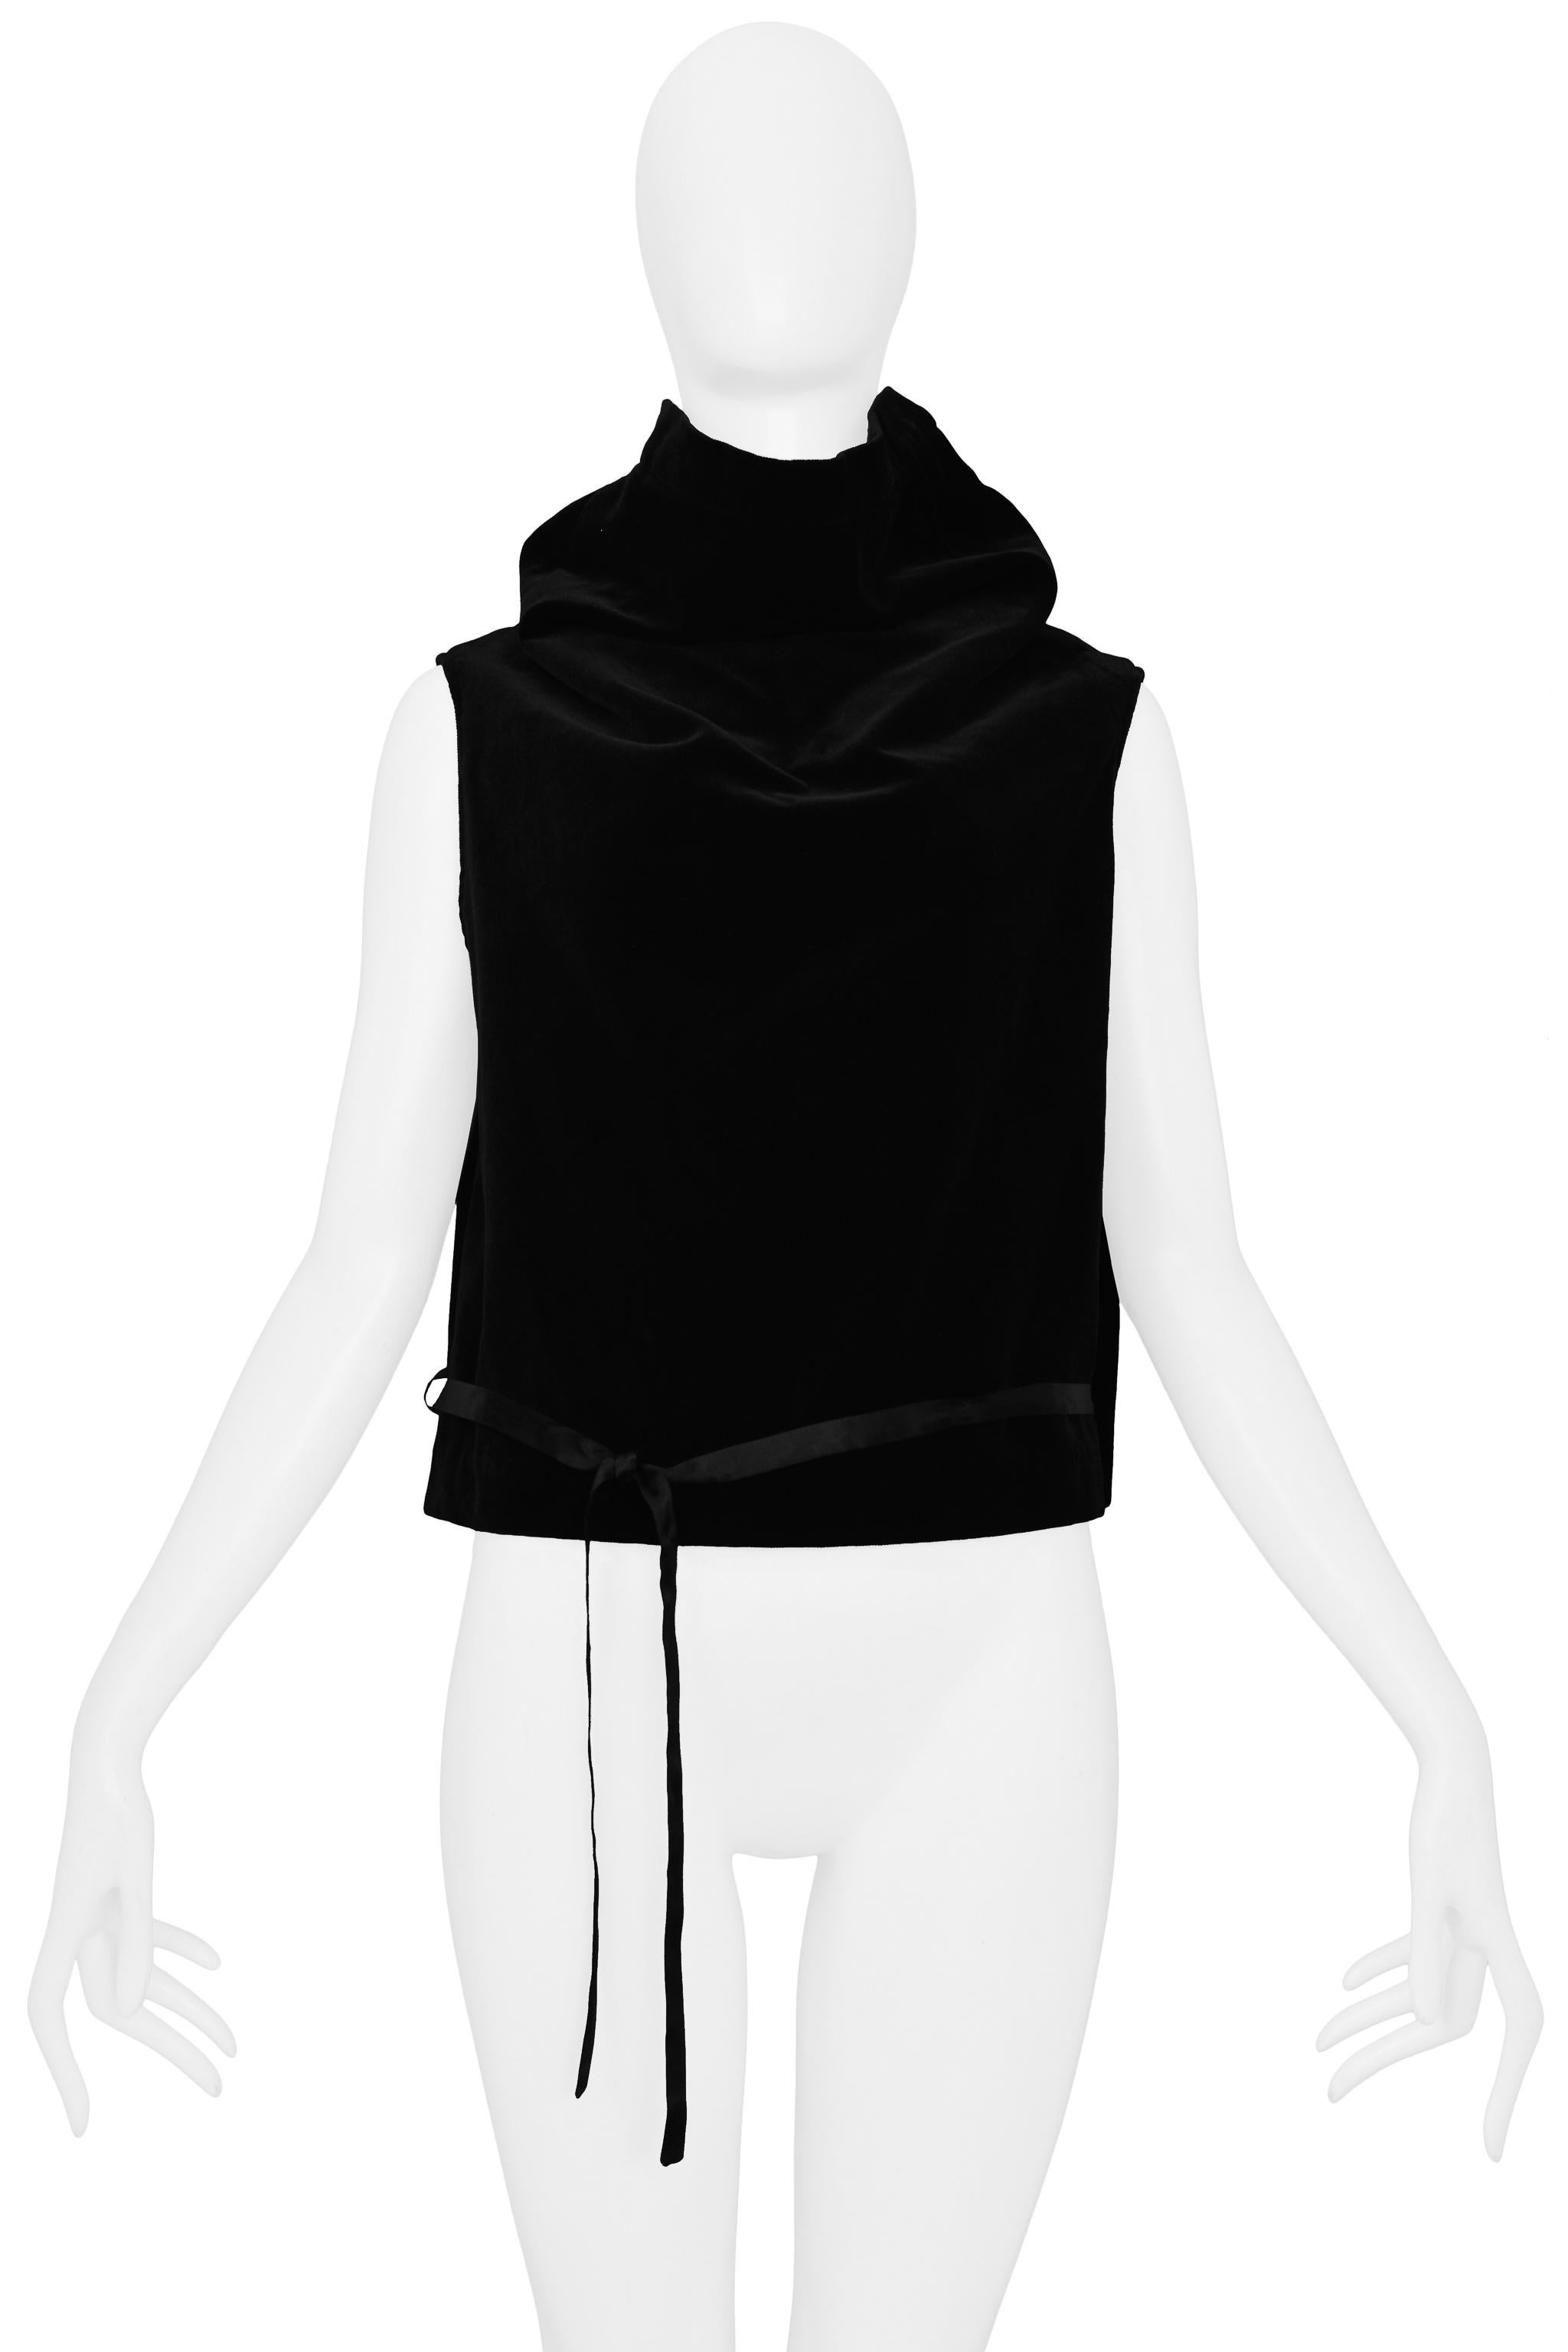 Resurrection Vintage is excited to offer a vintage Maison Martin Margiela artisanal black velvet top made from a skirt pattern. The sleeveless top features a classic skirt waistband and zipper that acts as a collar, black rayon lining, and a black